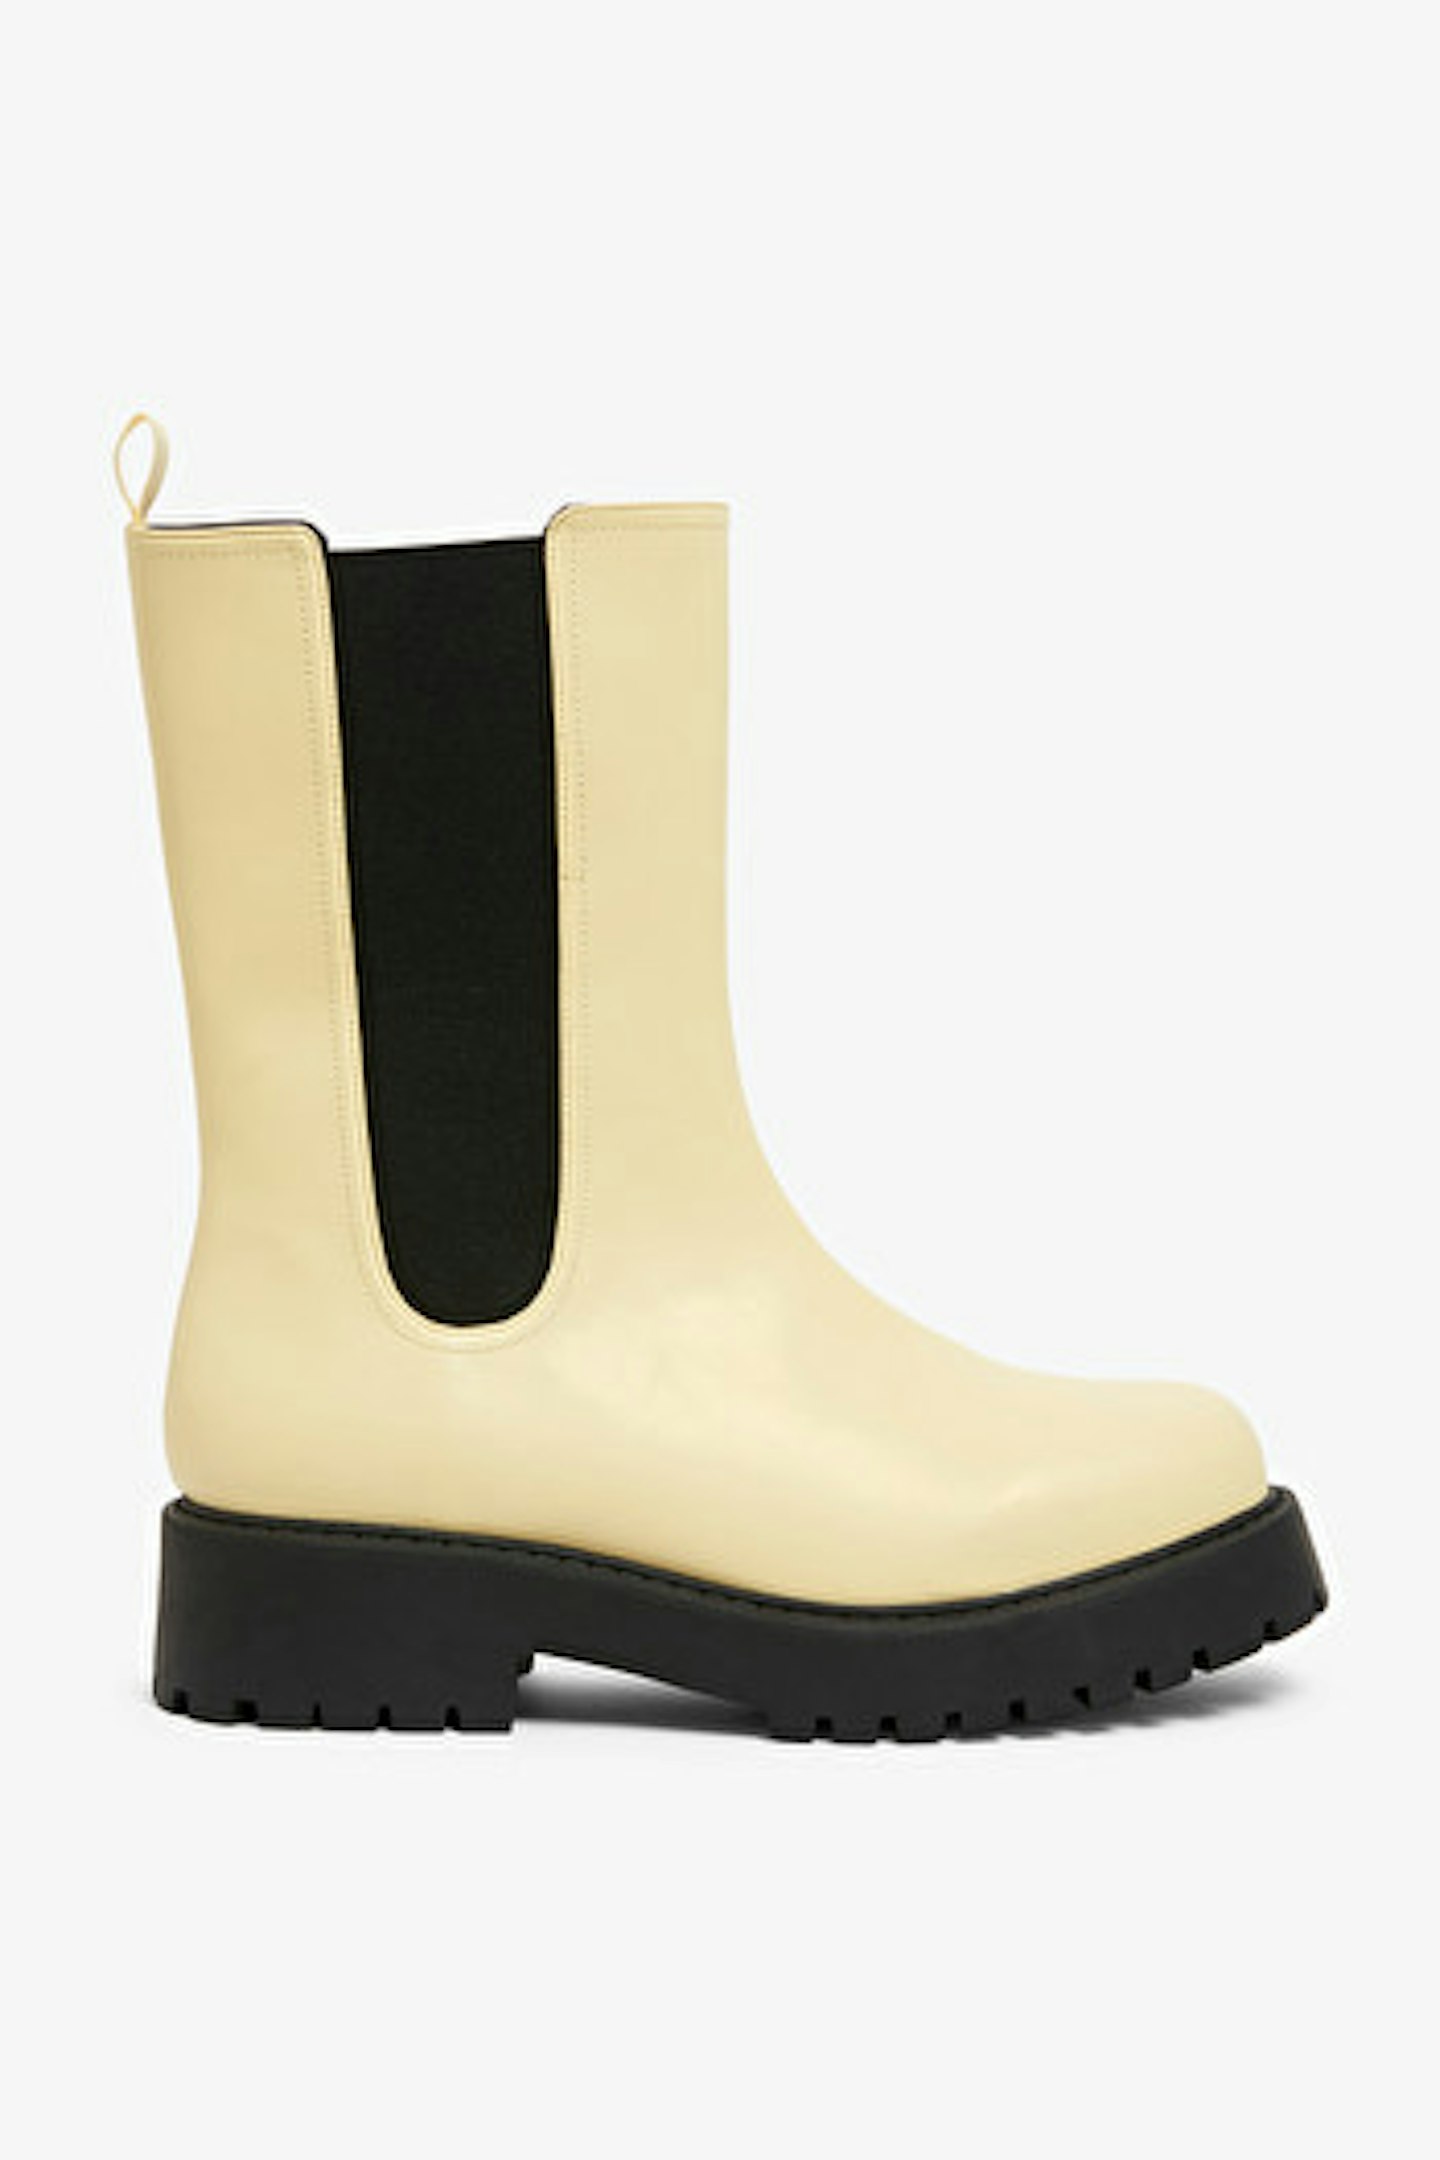 Monki, Faux leather ankle boots, £45